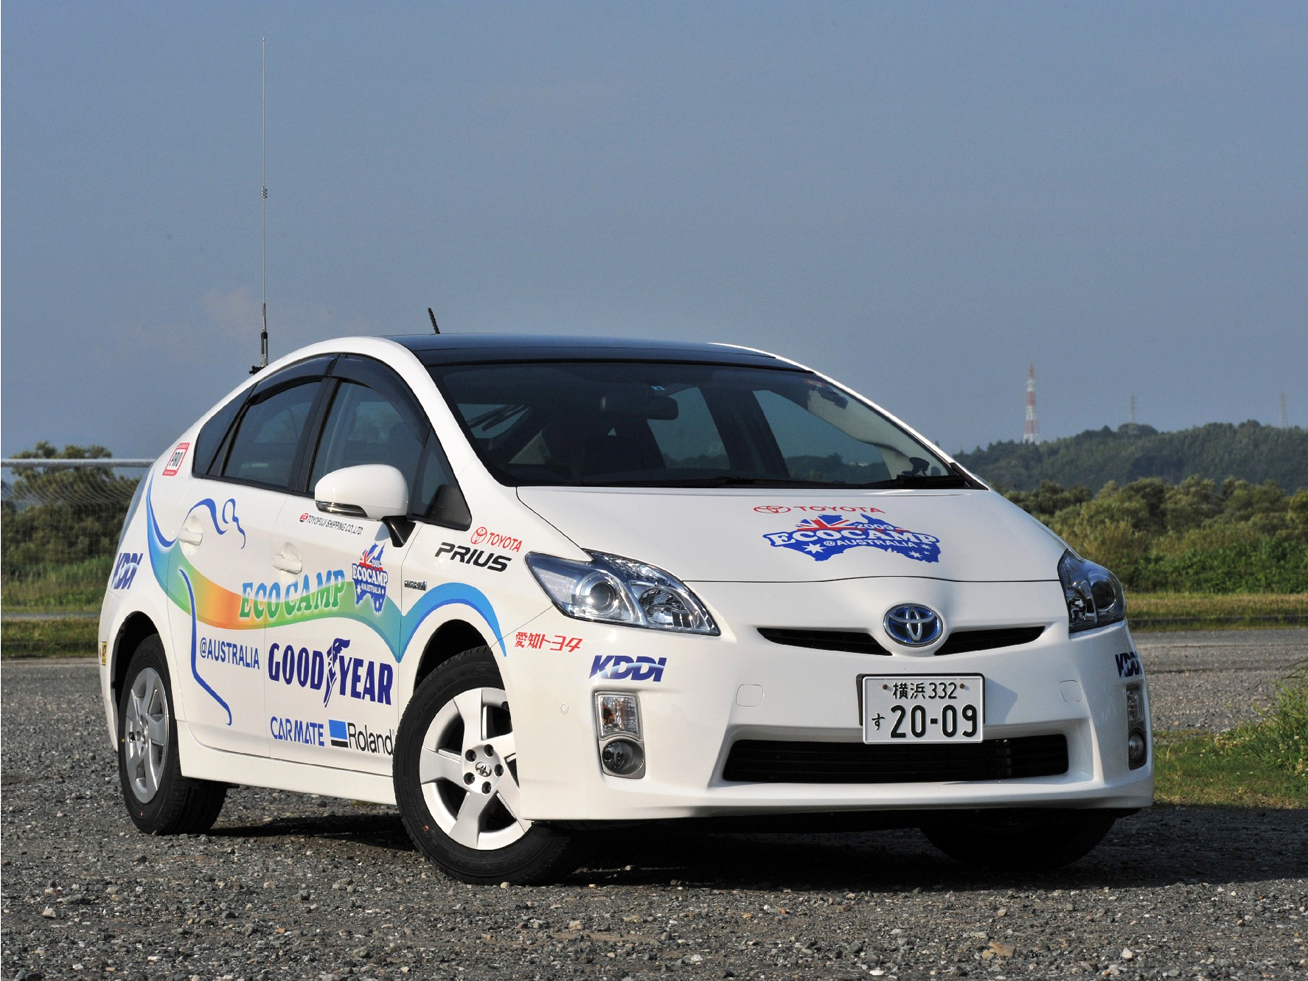 The official ECOCAMP in Australia 2009 Prius, decorated with full-color Roland graphics.